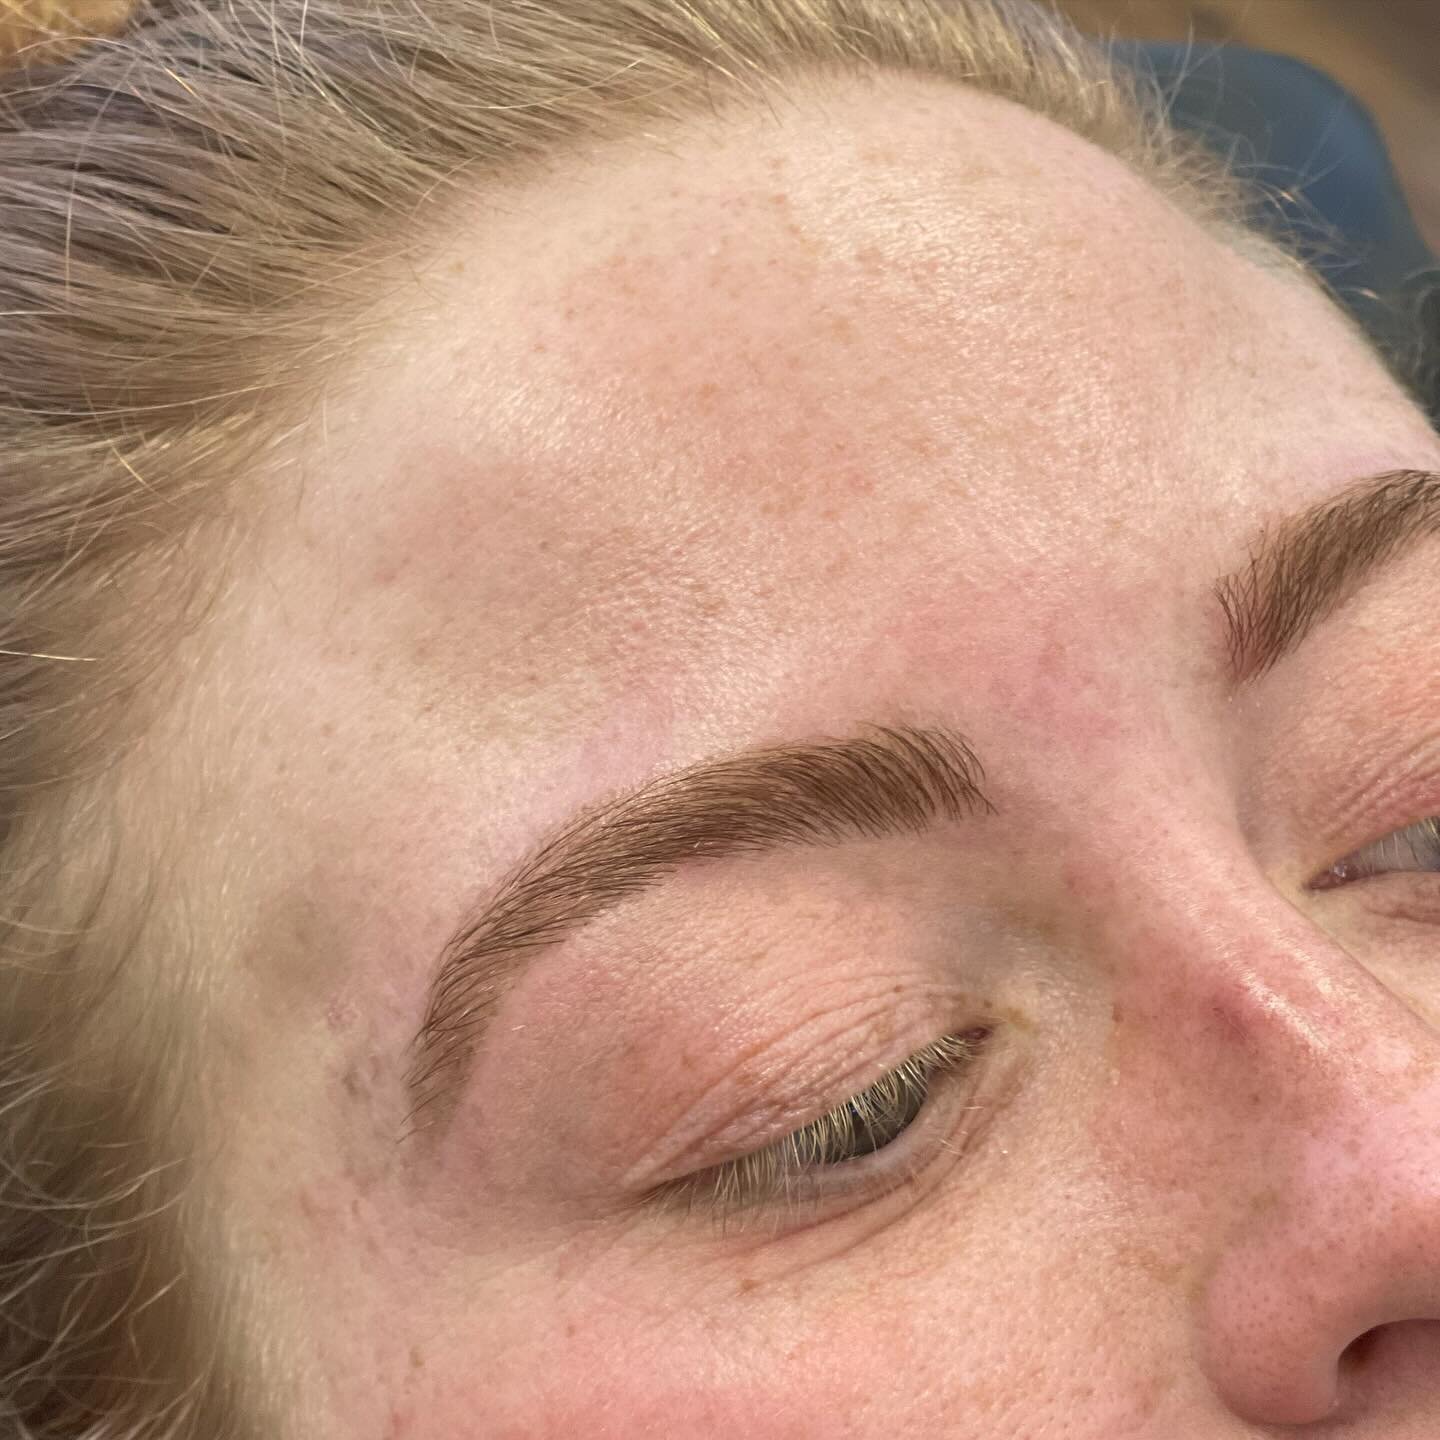 A brow wax &amp; tint is good for everyone, but it&rsquo;s REALLY SATISFYING for my clients with light or gray brow hair!! I tinted all of Lindy&rsquo;s little blonde brow hairs making her brows look fuller, and the I mapped her brows out to give her